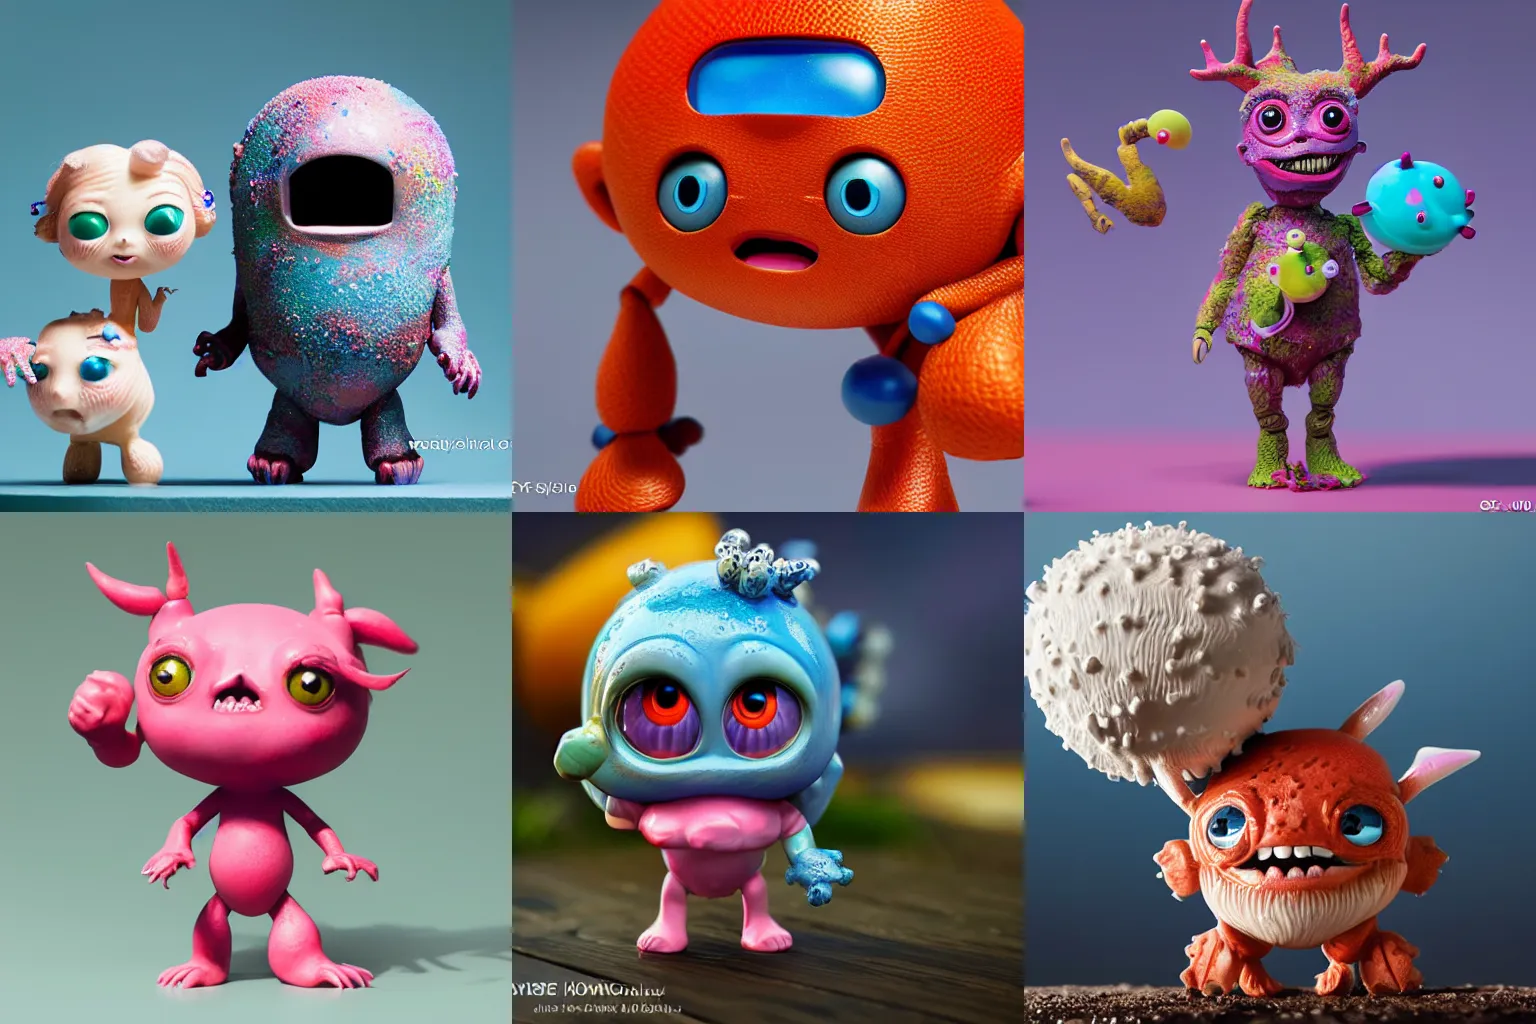 Prompt: ebay product, beautiful cute, cute miniature resine action figure, High detail photography, 8K, 3d fractals, cute pictoplasma, one simple ceramic tintoy fury monster Figure sculpture, surrounded by splashes, 3d primitives, in a Studio hollow, by pixar, by jonathan ive, cgsociety, simulation